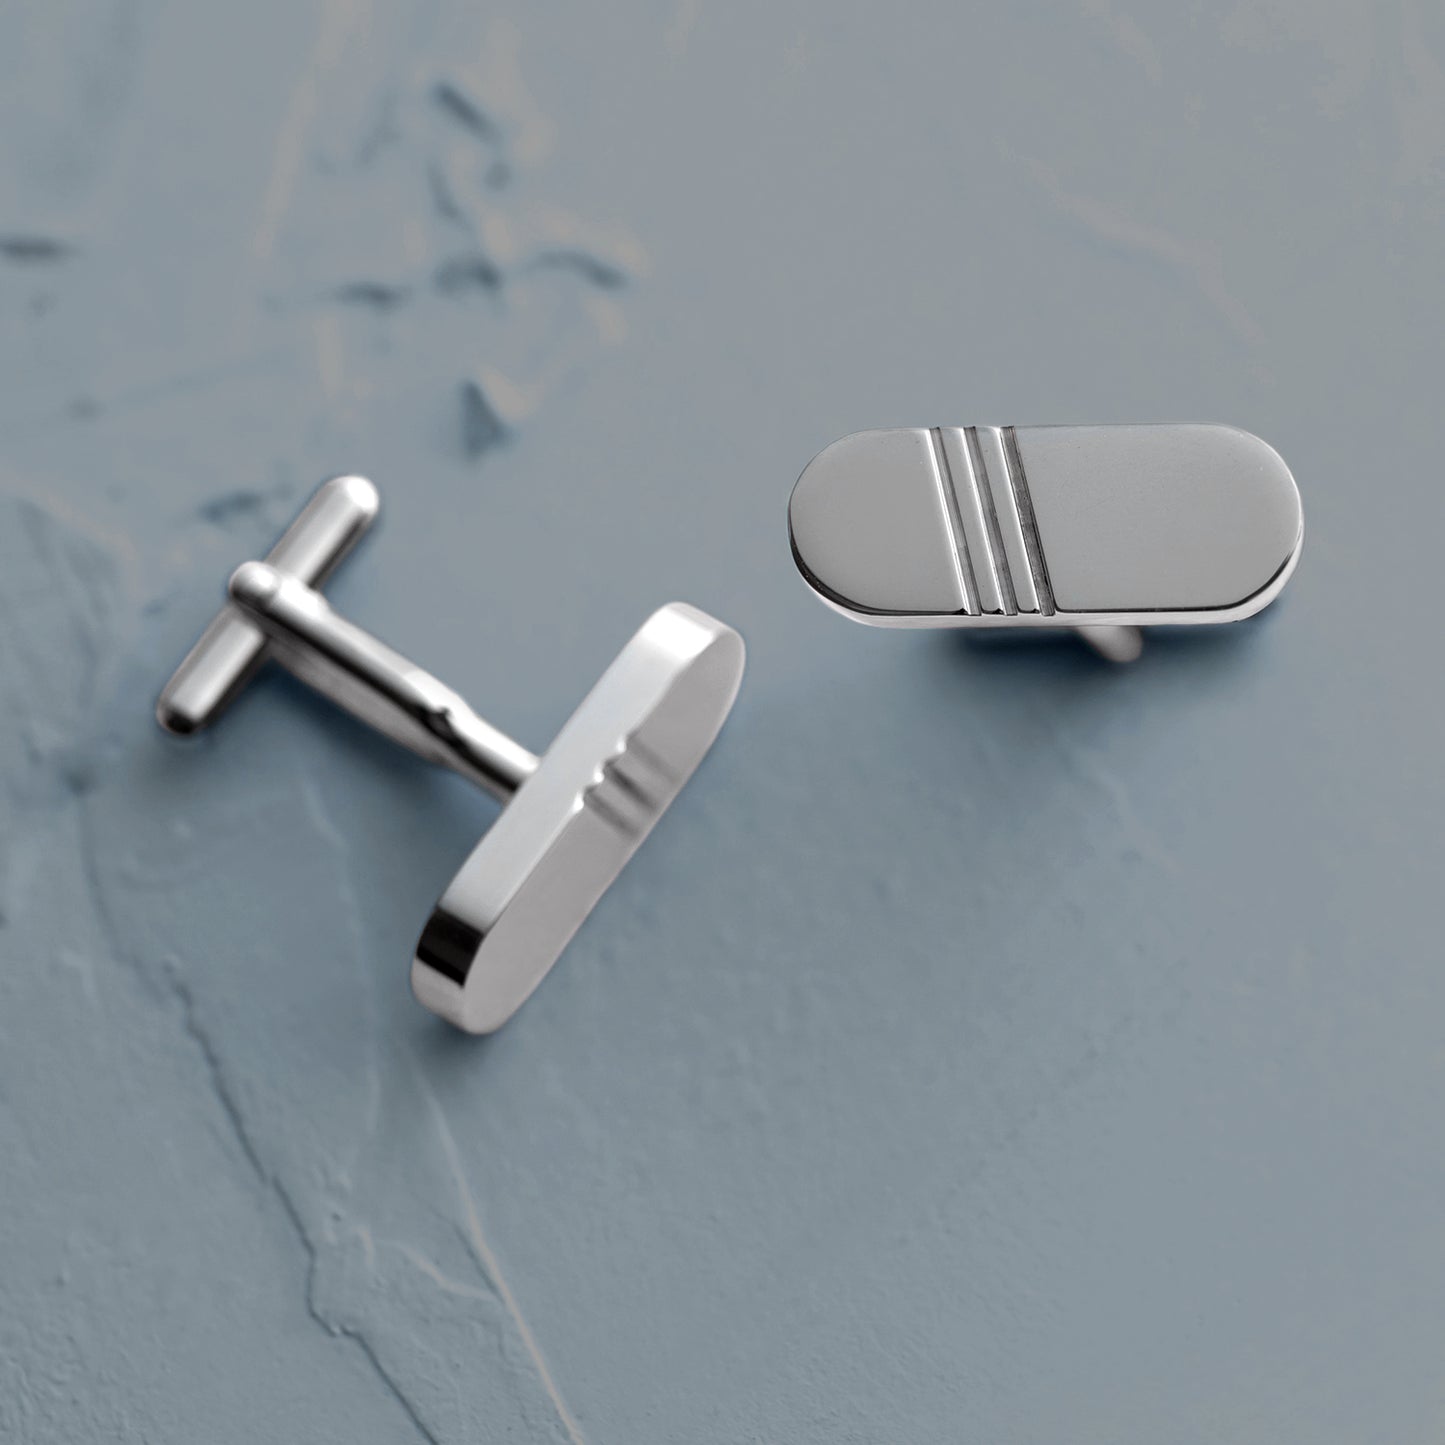 Stainless Steel Capsule Shape Cuff Links with Diagonal Grooves - Perfect for Weddings, Formal Events, or Gifting